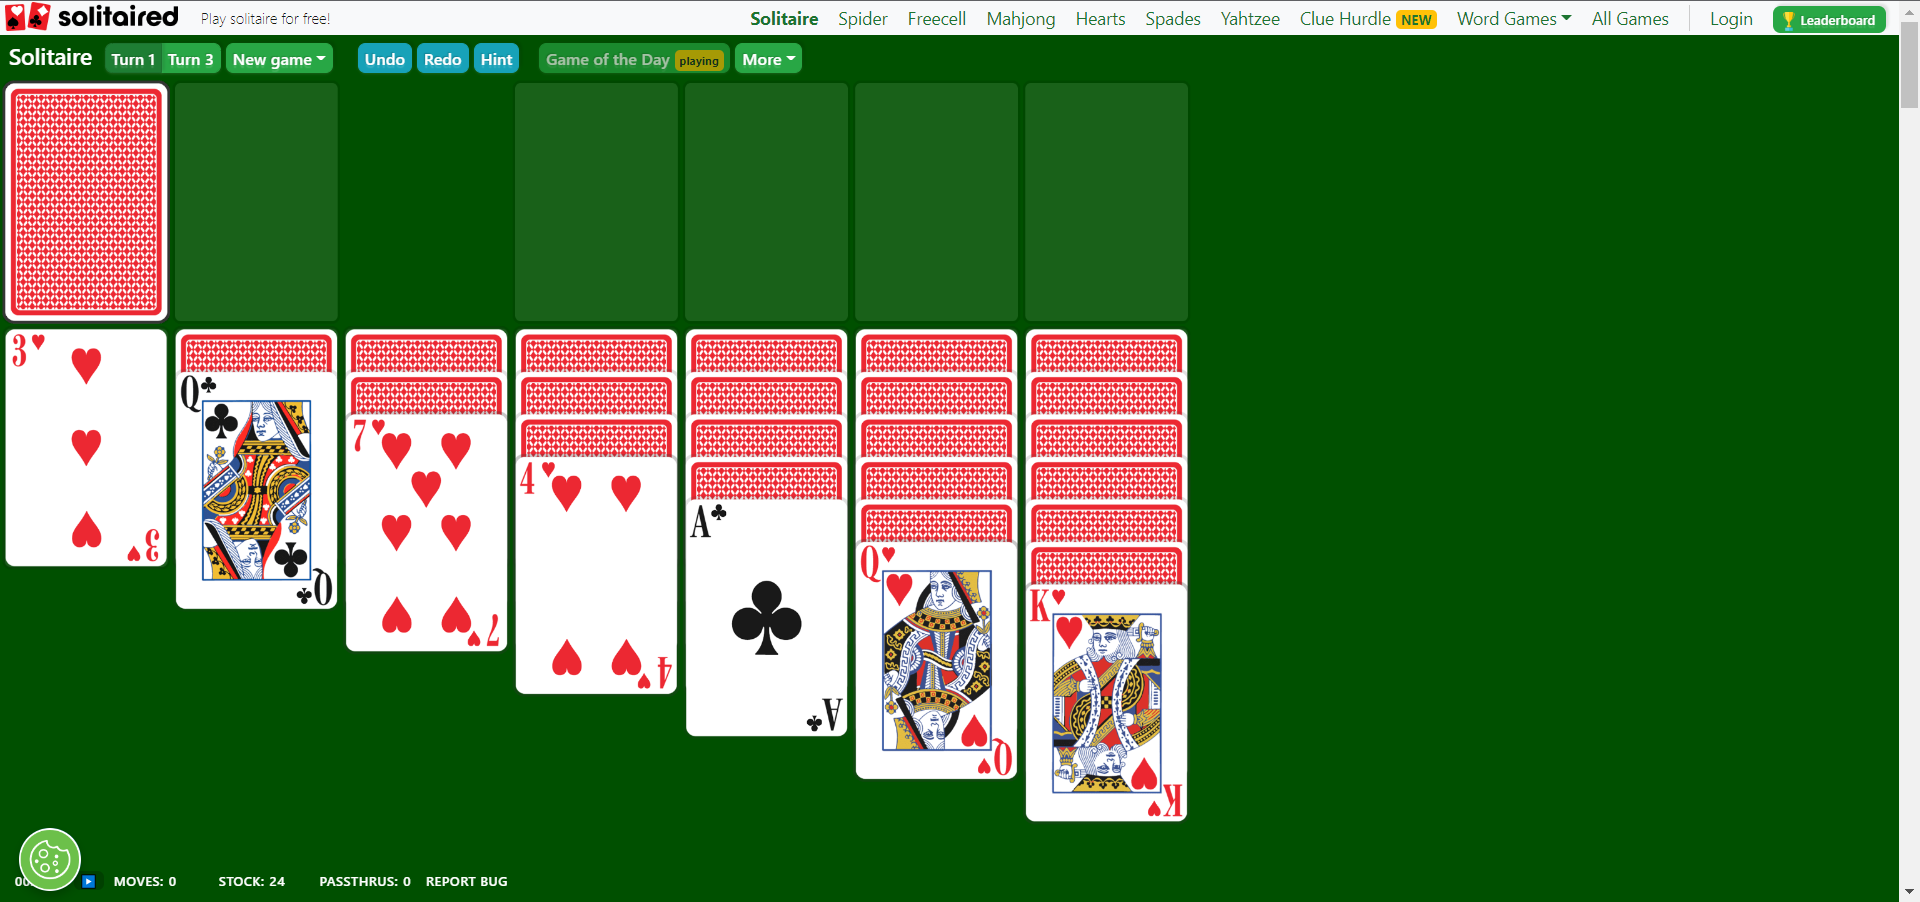 is solitaire the app free on laptop